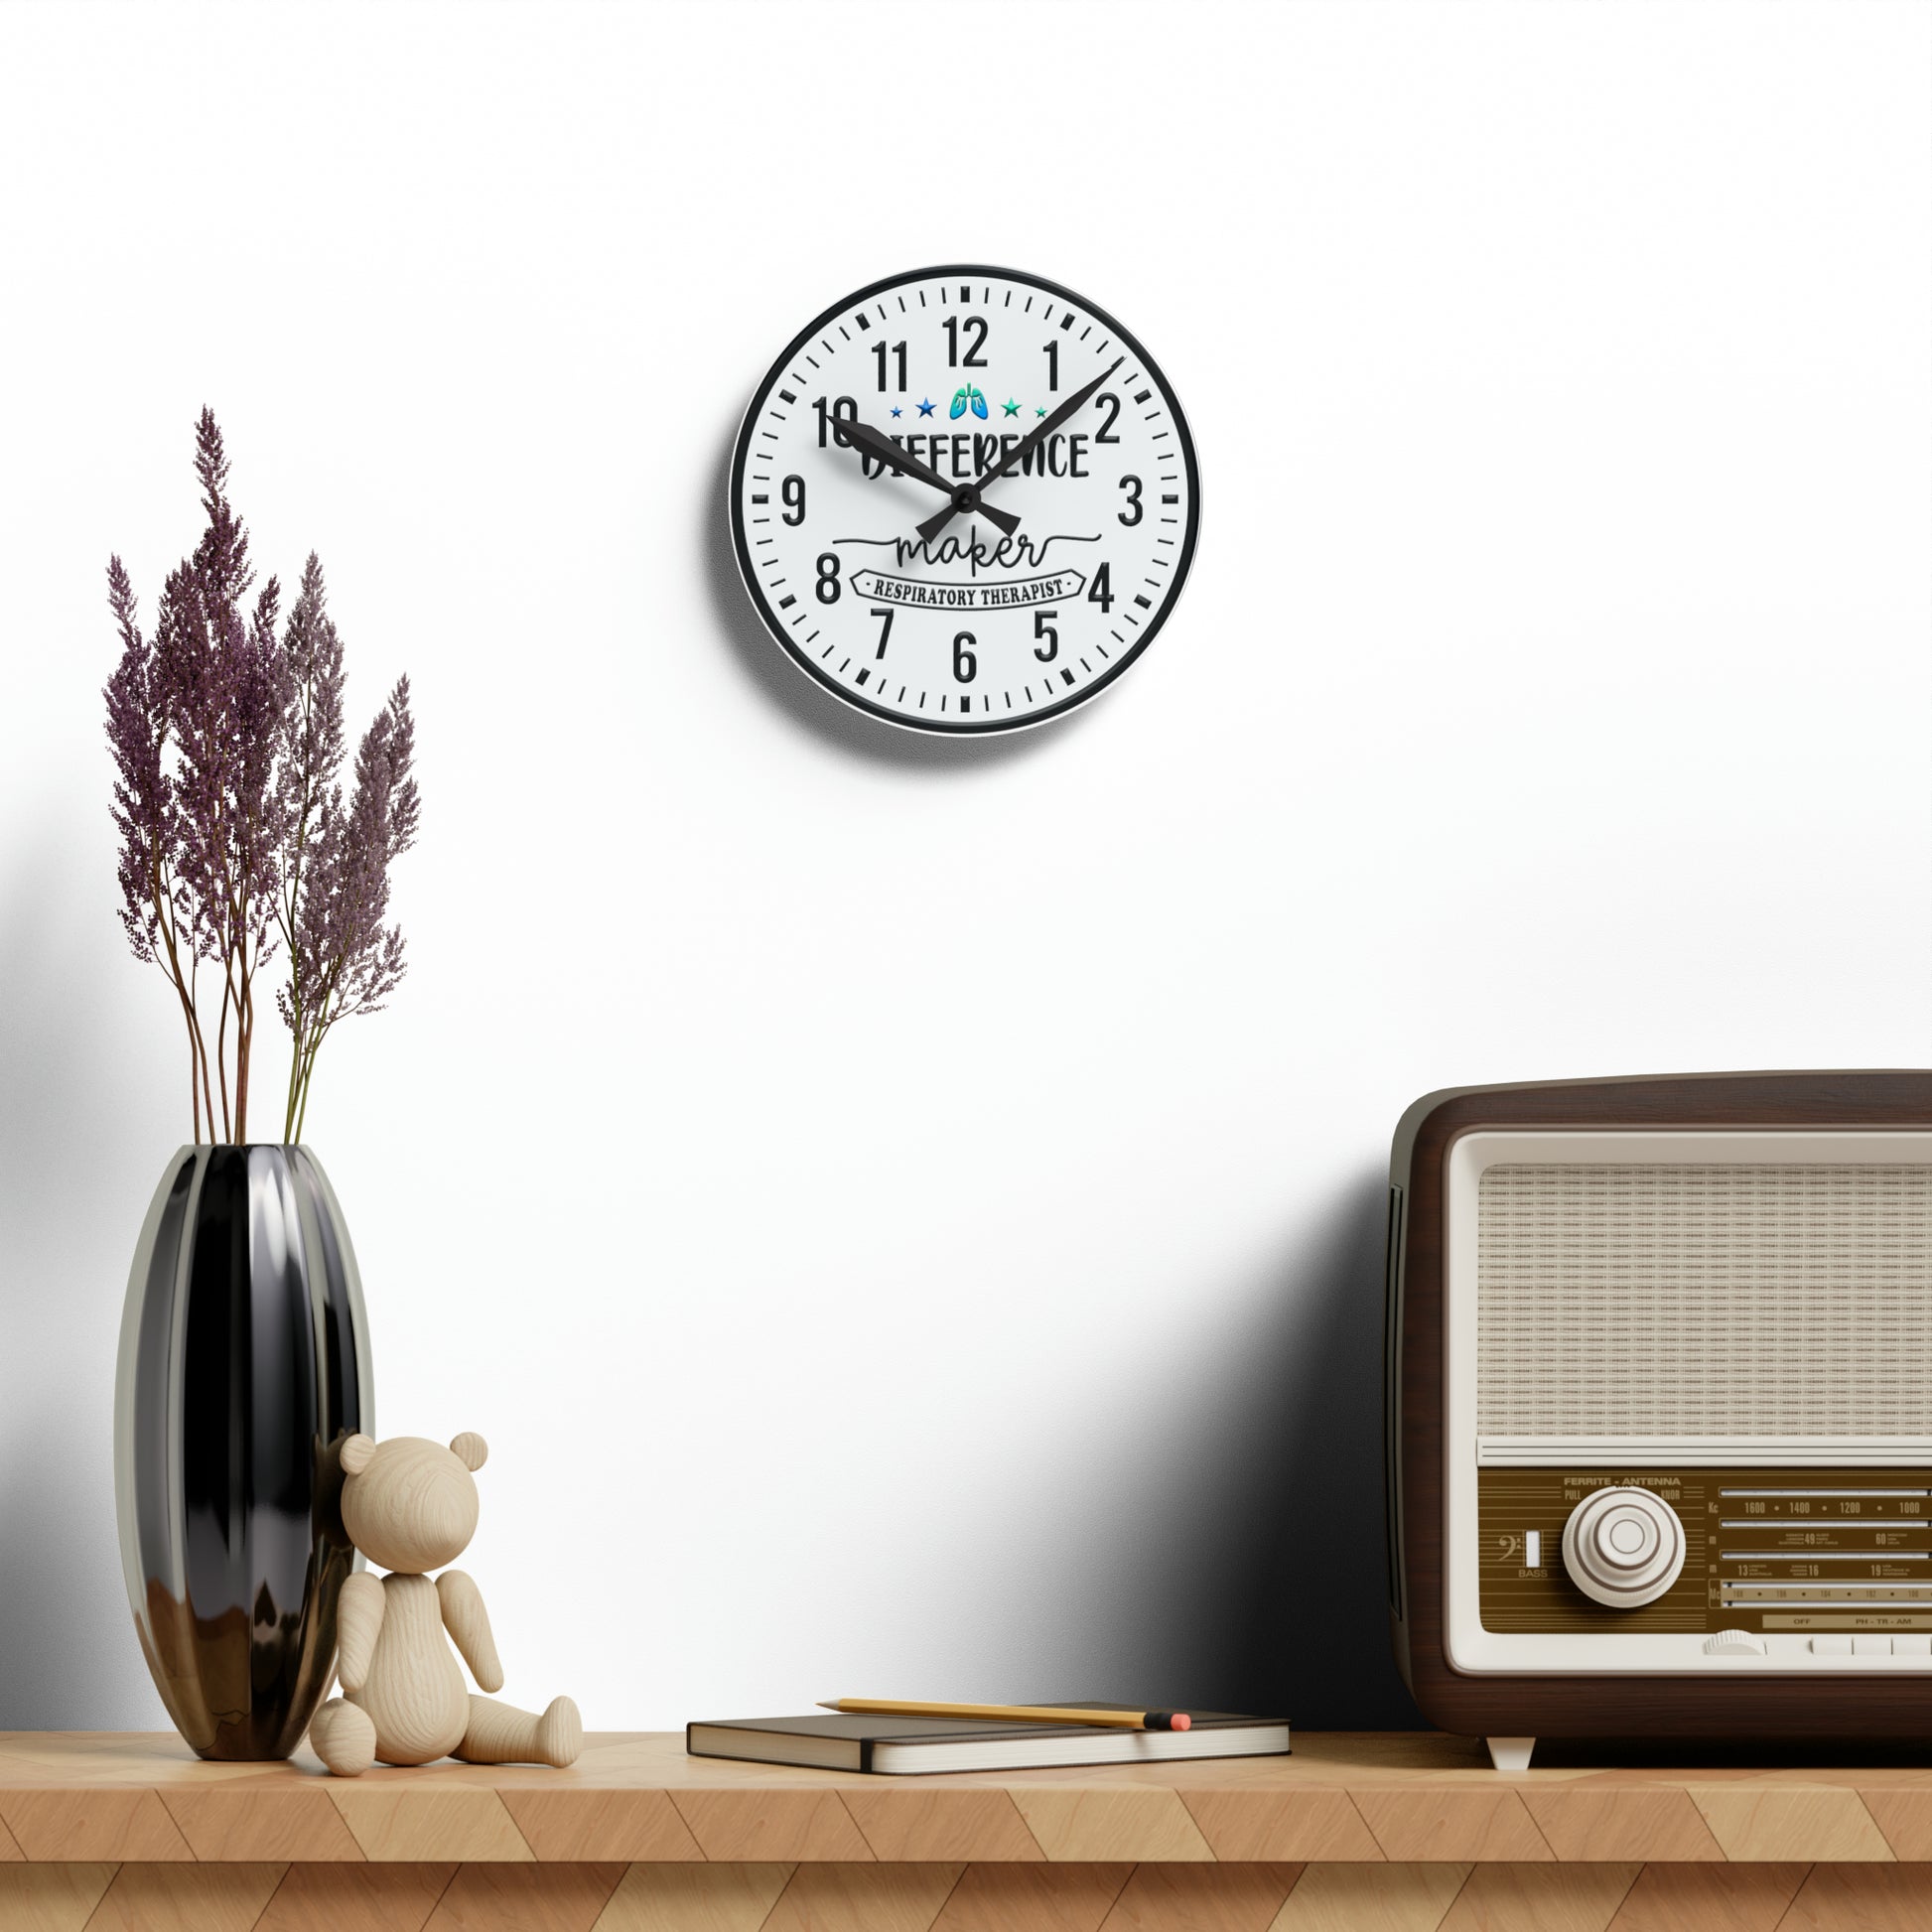 Respiratory Therapy Acrylic Wall Clock-TD Gift Solutions.com